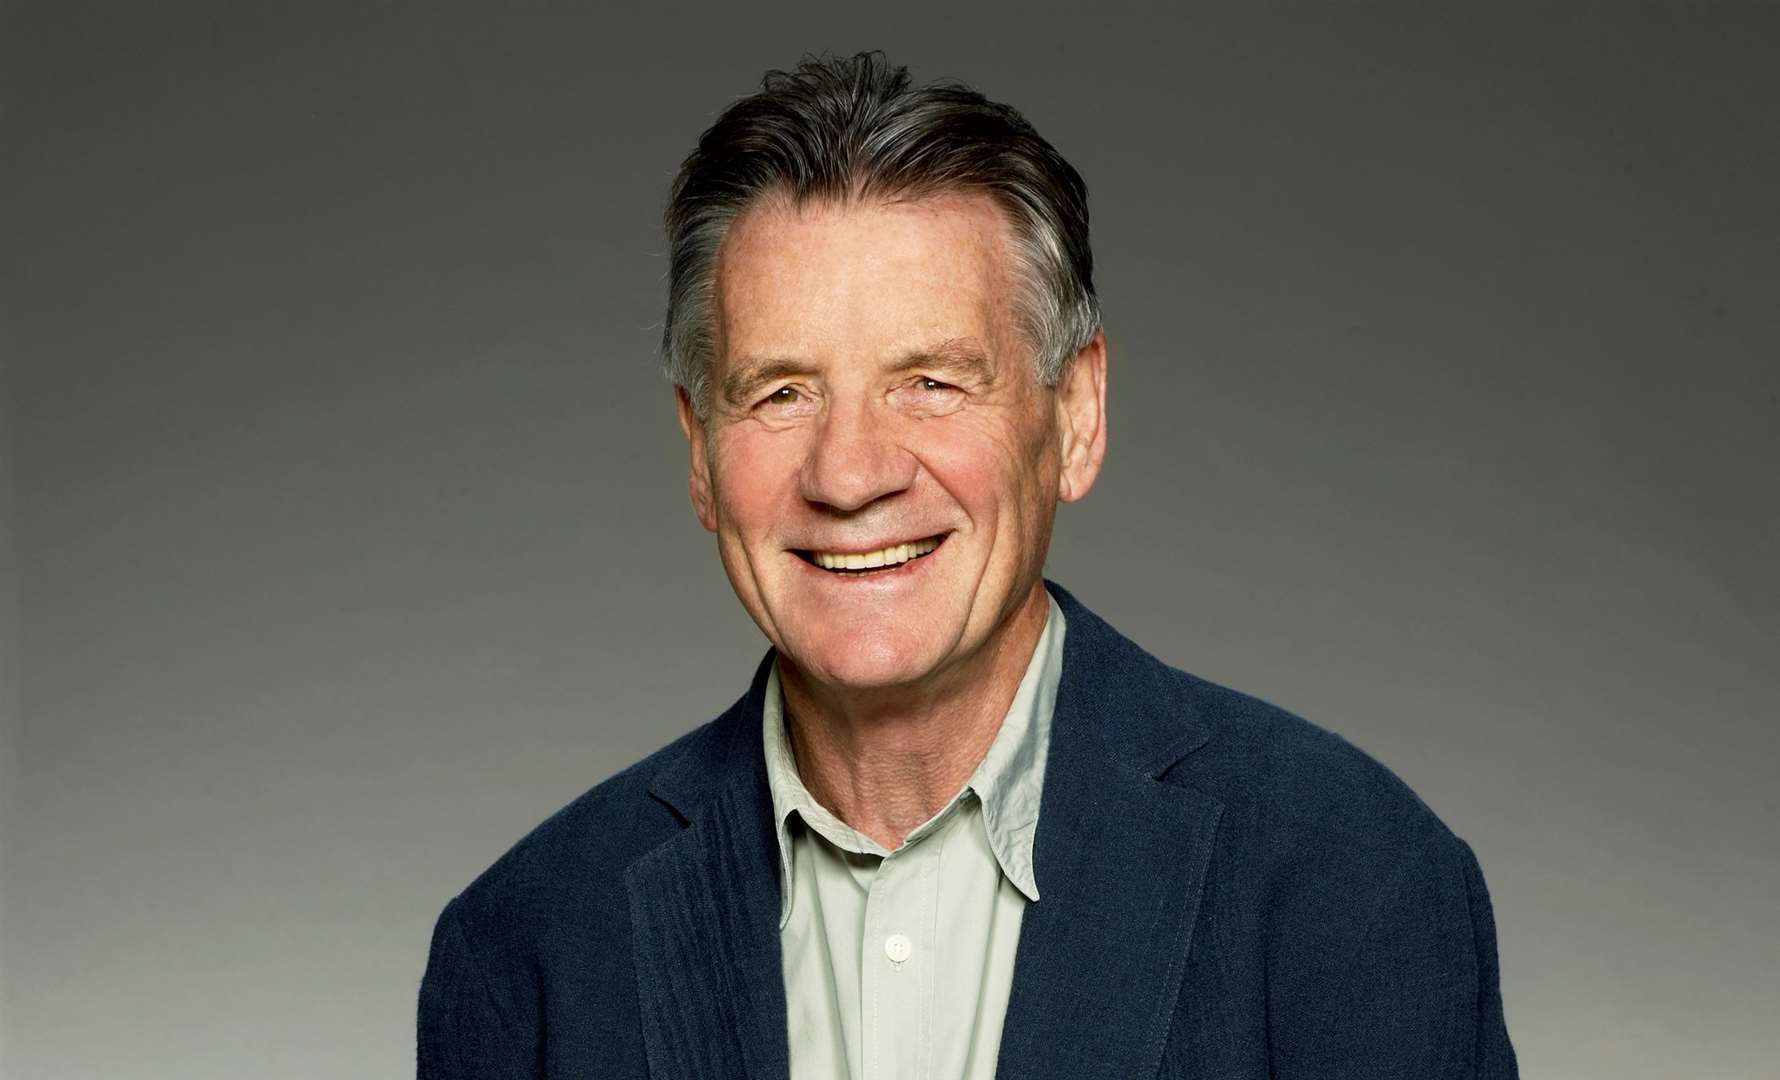 Monty Python’s Michael Palin is one of the headliners at this year’s Tunbridge Wells Literary Festival